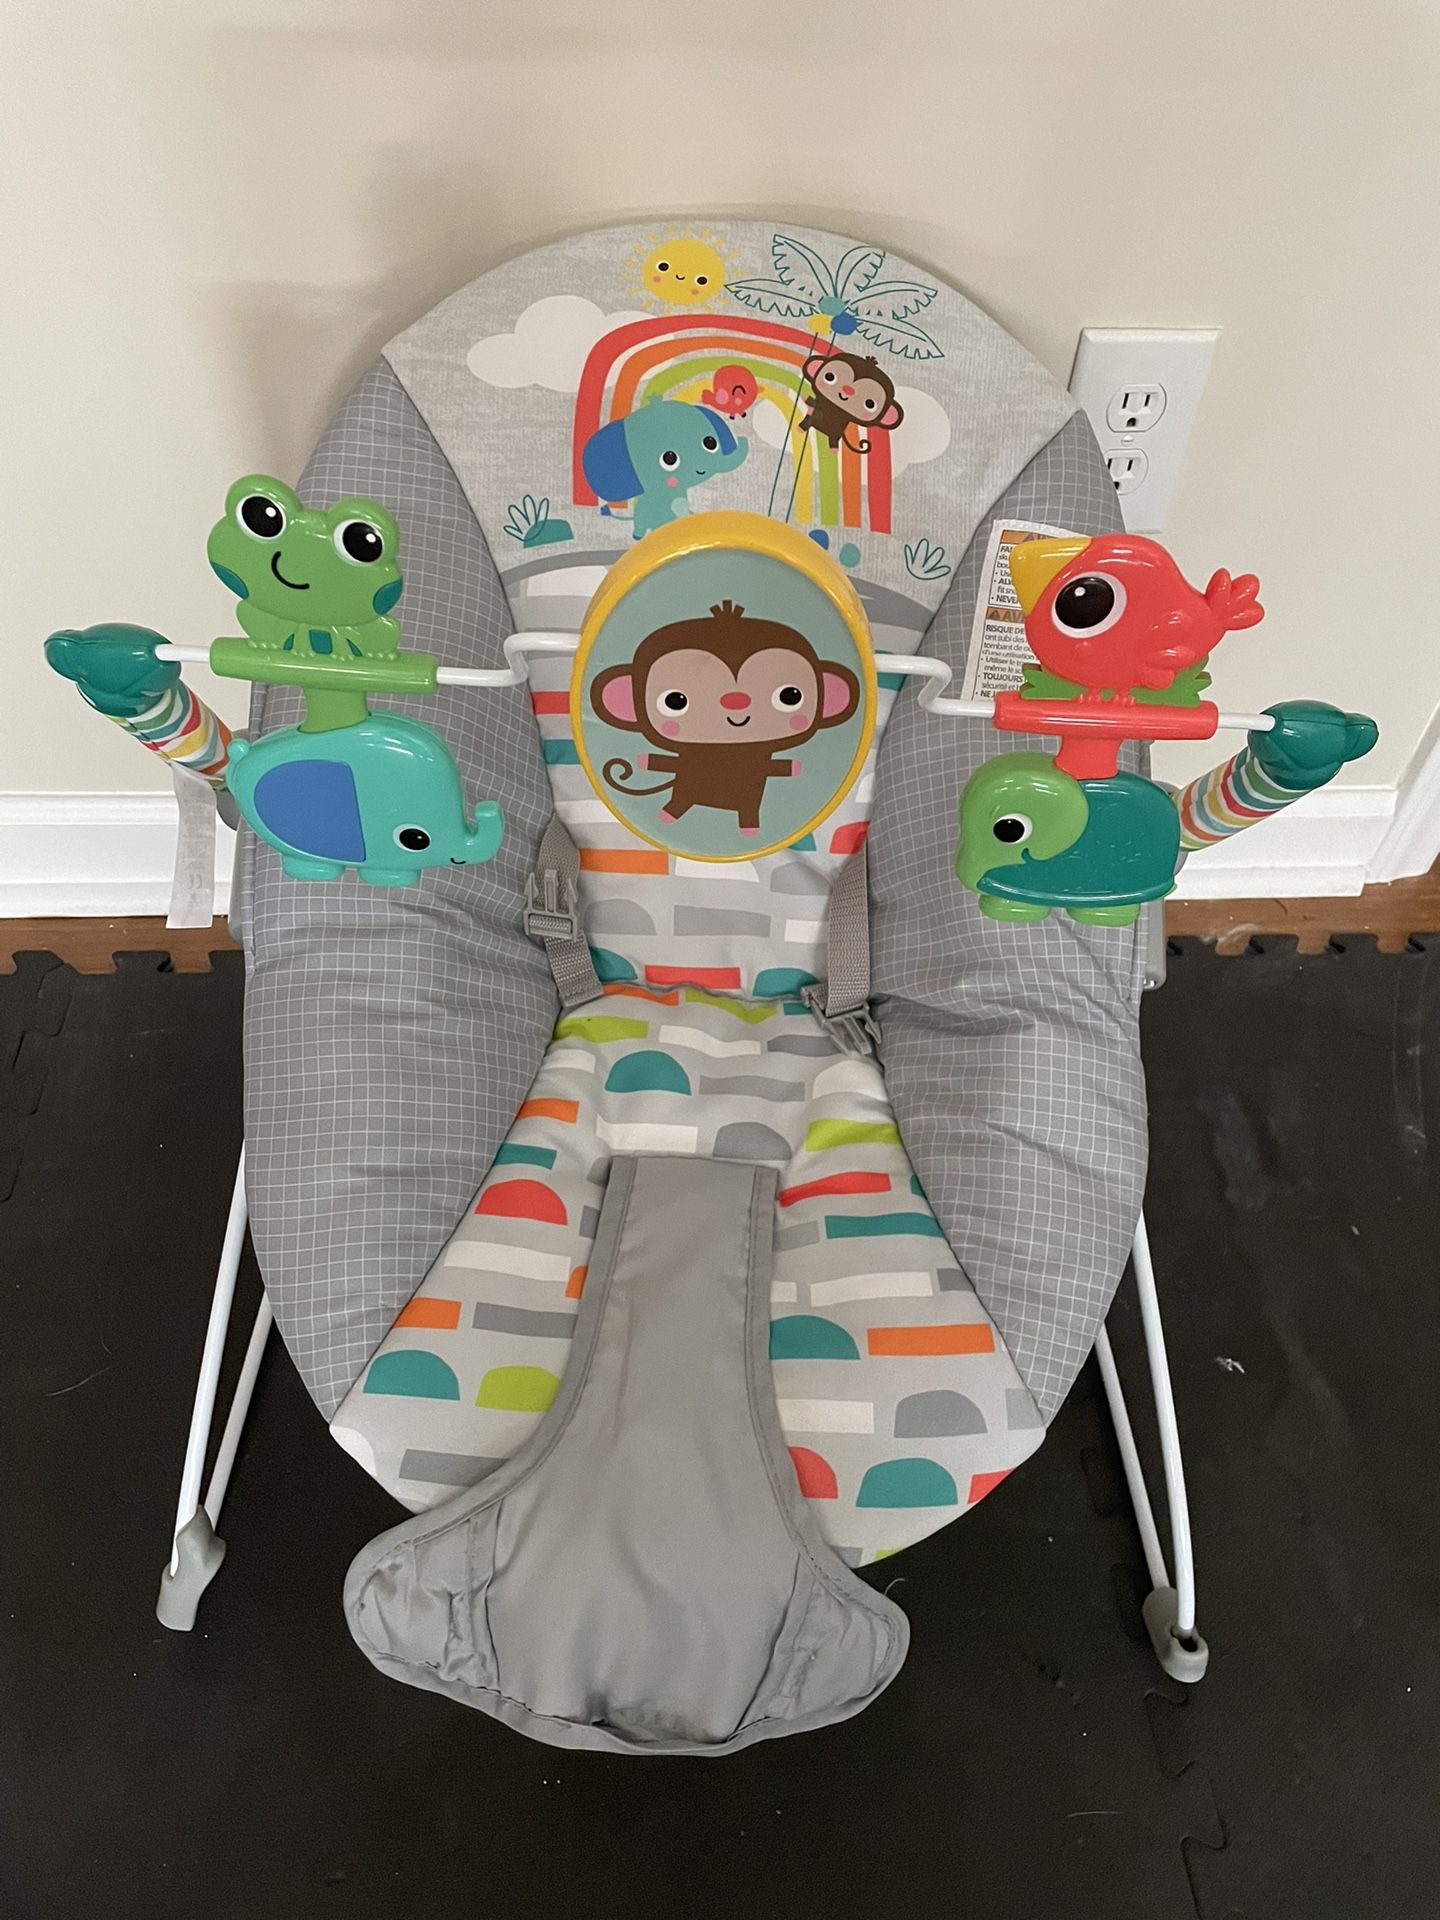 Bright Starts Playful Paradise Vibrating Baby Bouncer with Toys